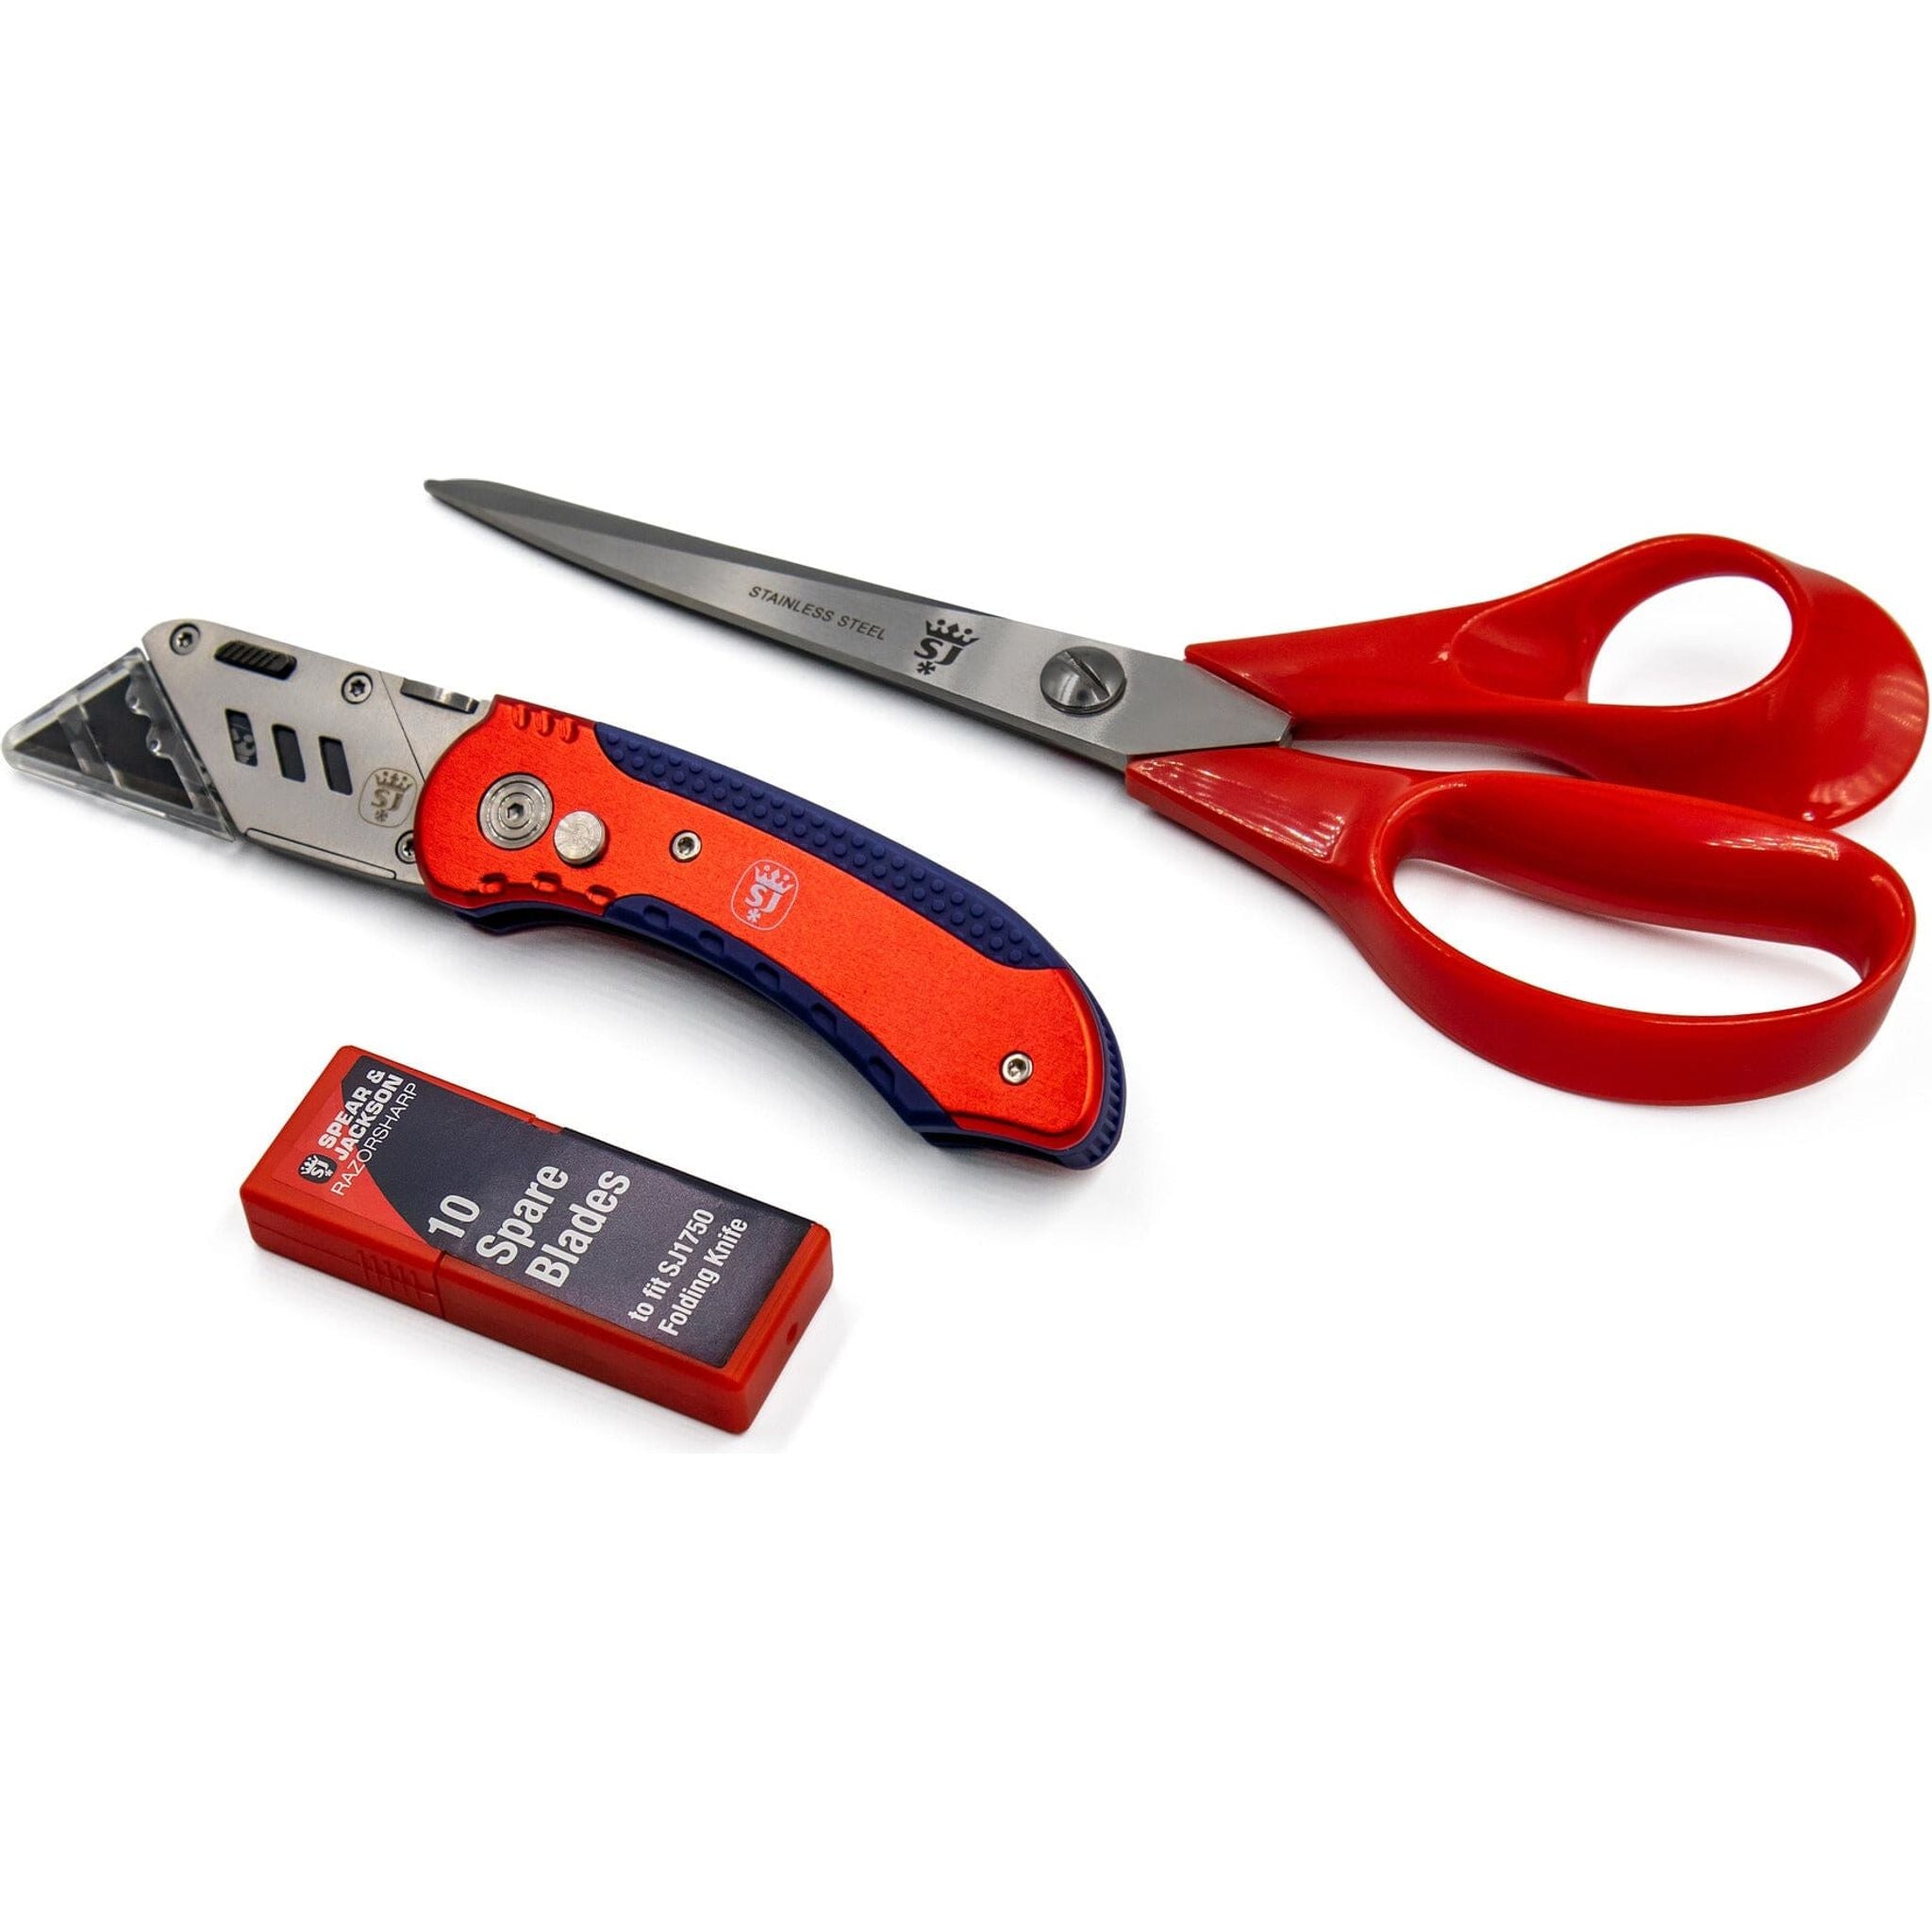 Carpet Lining Tool Kit - High Quality Tools for Lining your Campervan Kiravans 